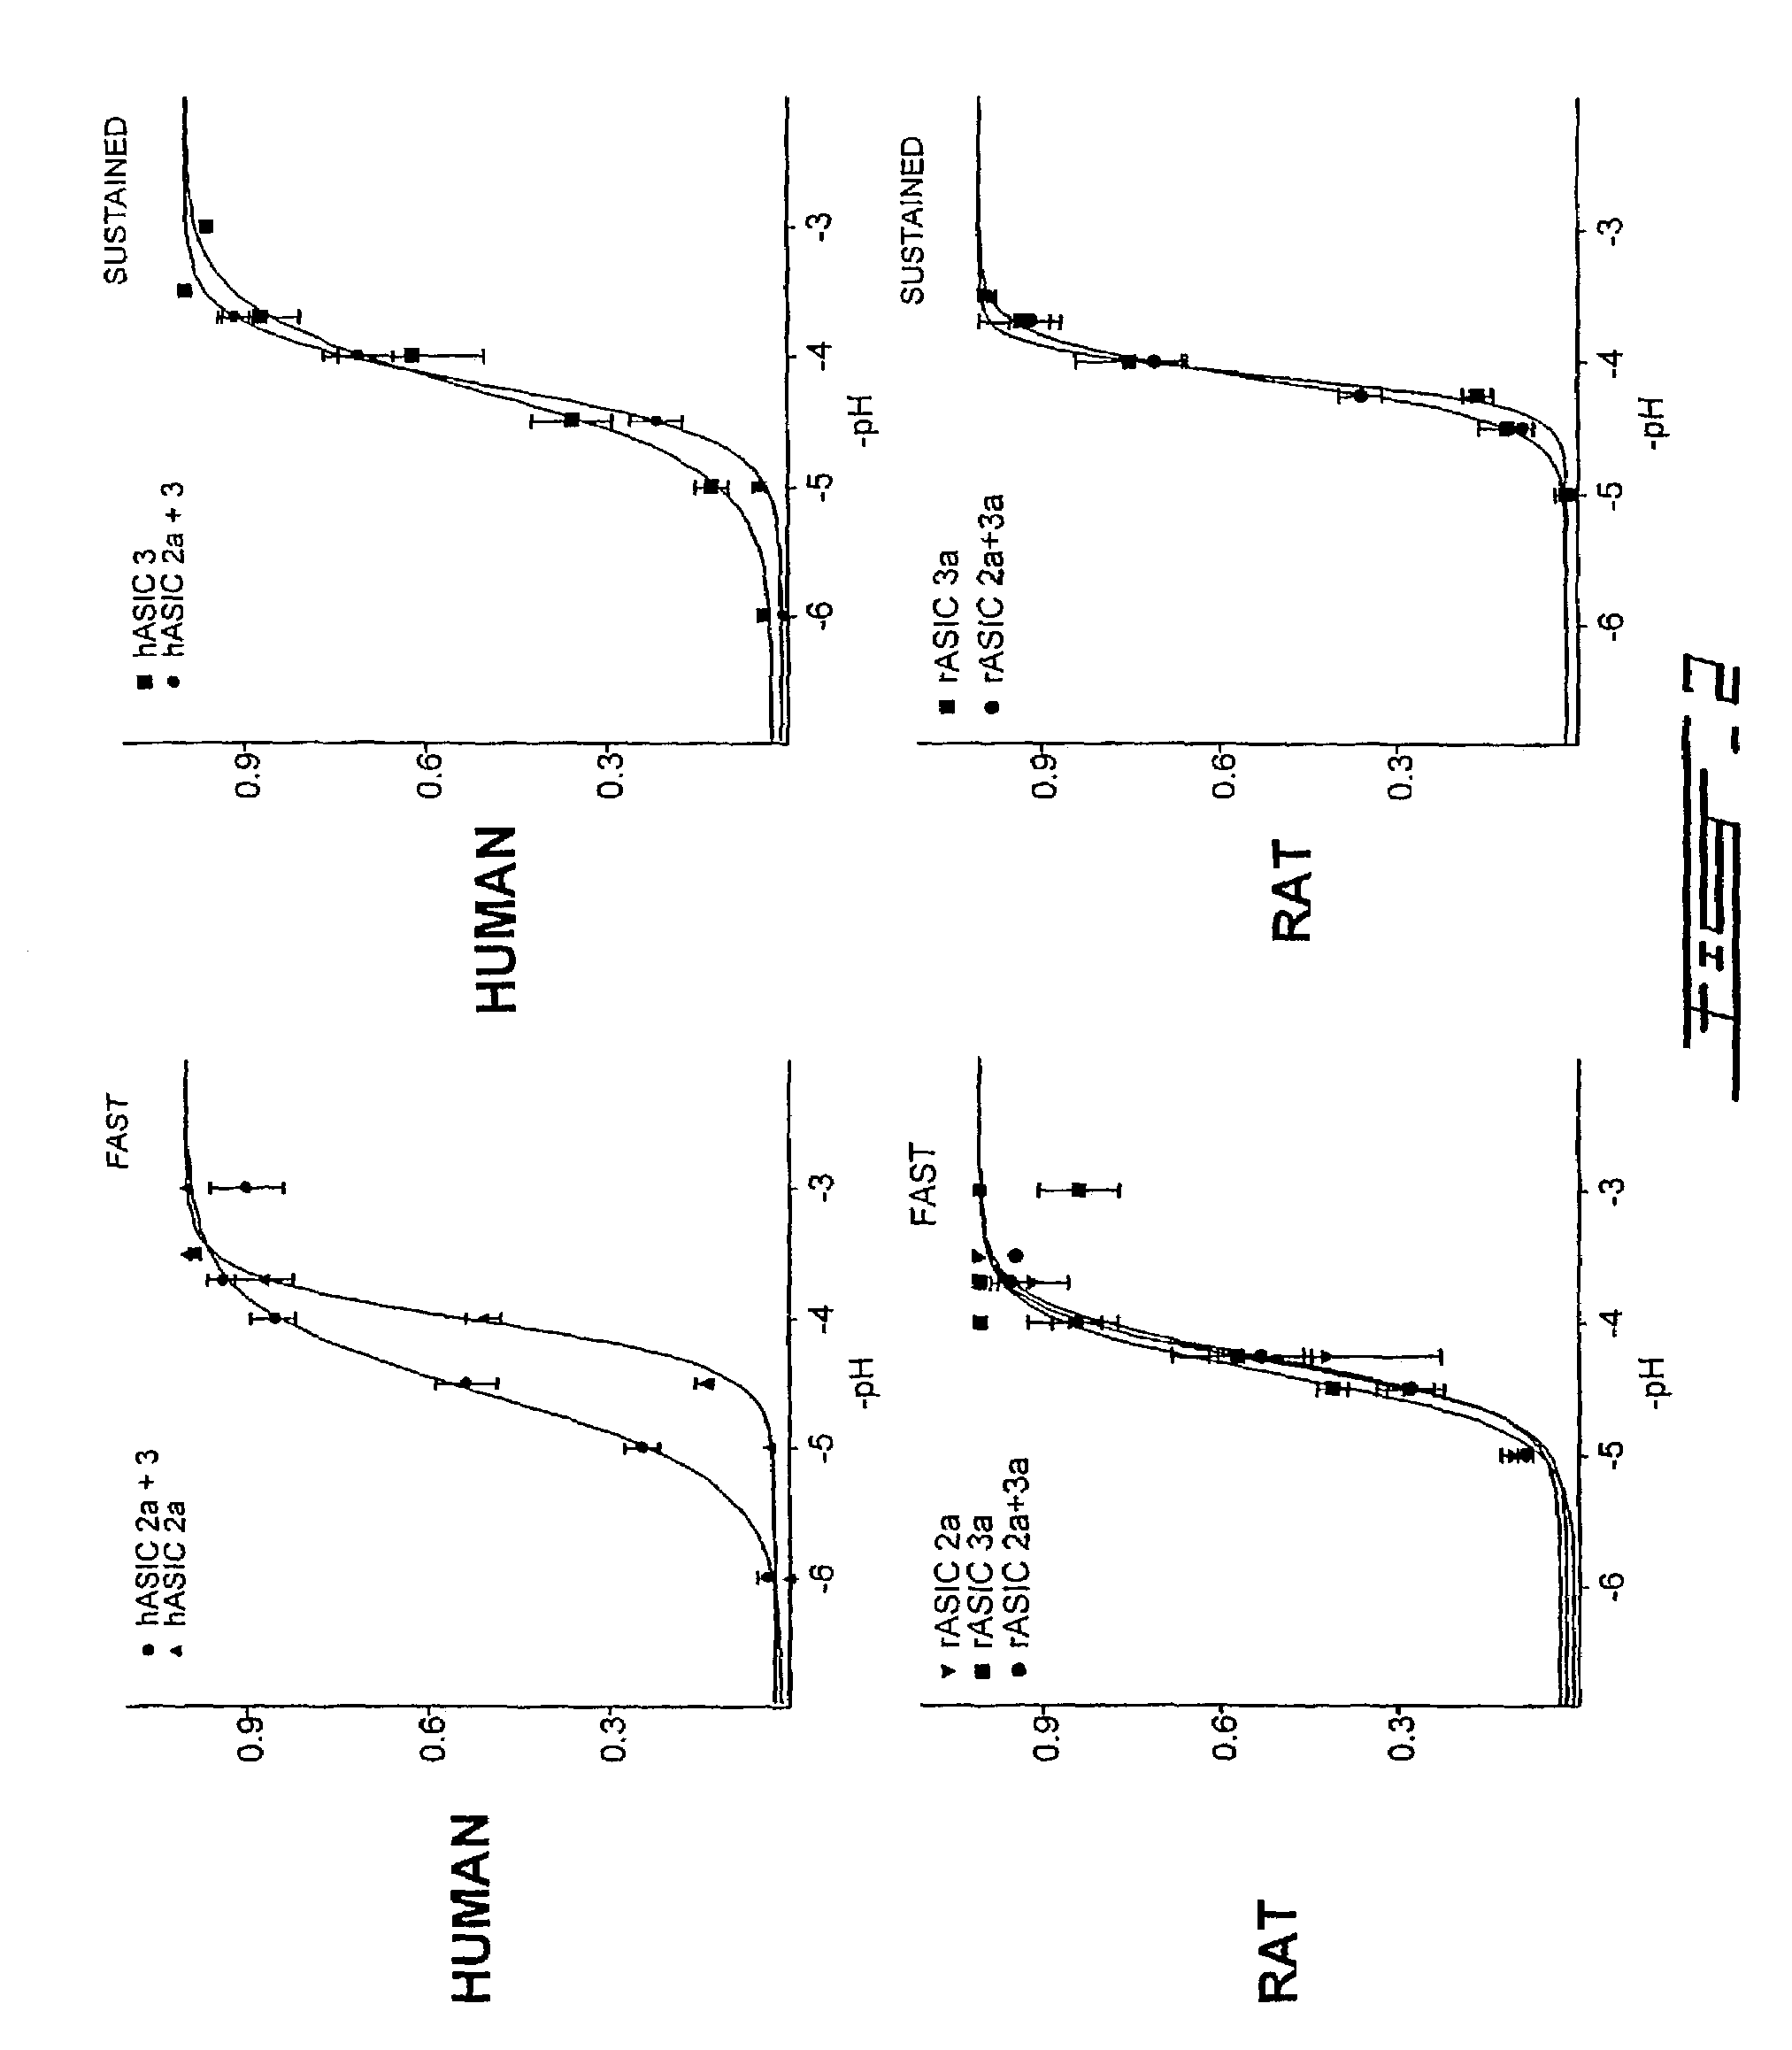 Heteromultimeric ion channel receptor and uses thereof